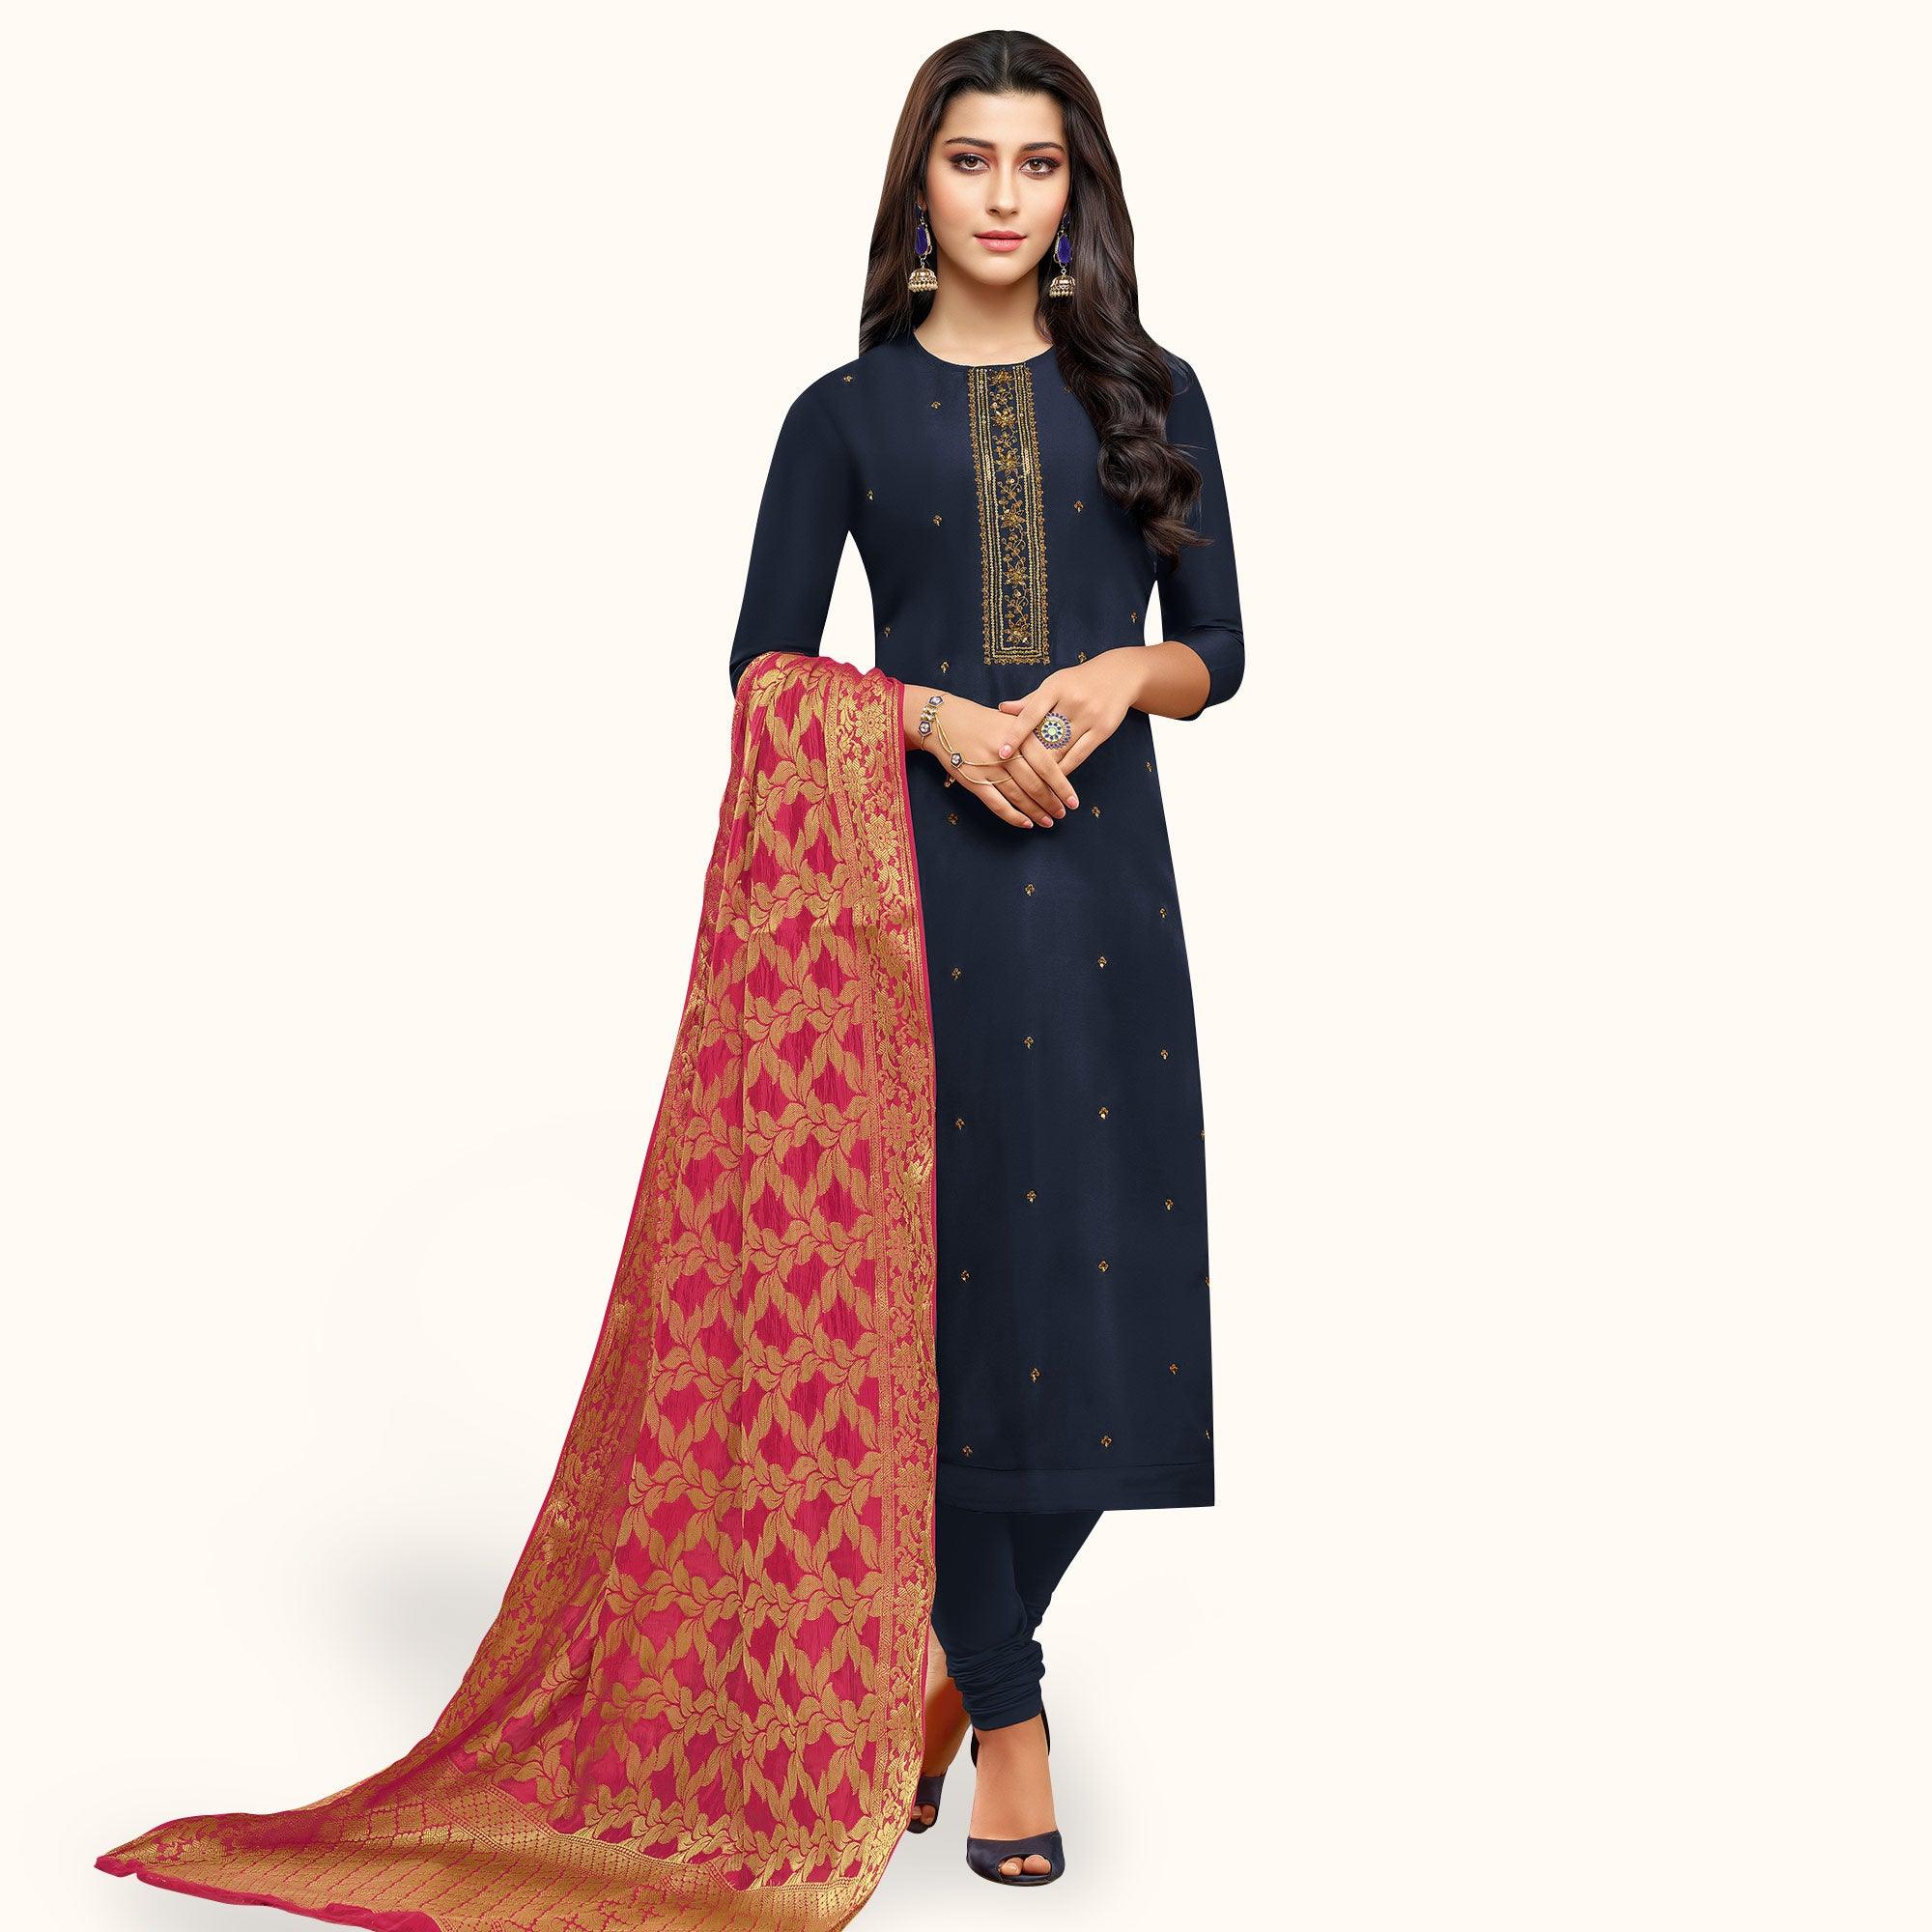 Radiant Navy Blue Colored Partywear Embroidered Silk Suit With Banarasi Dupatta - Peachmode